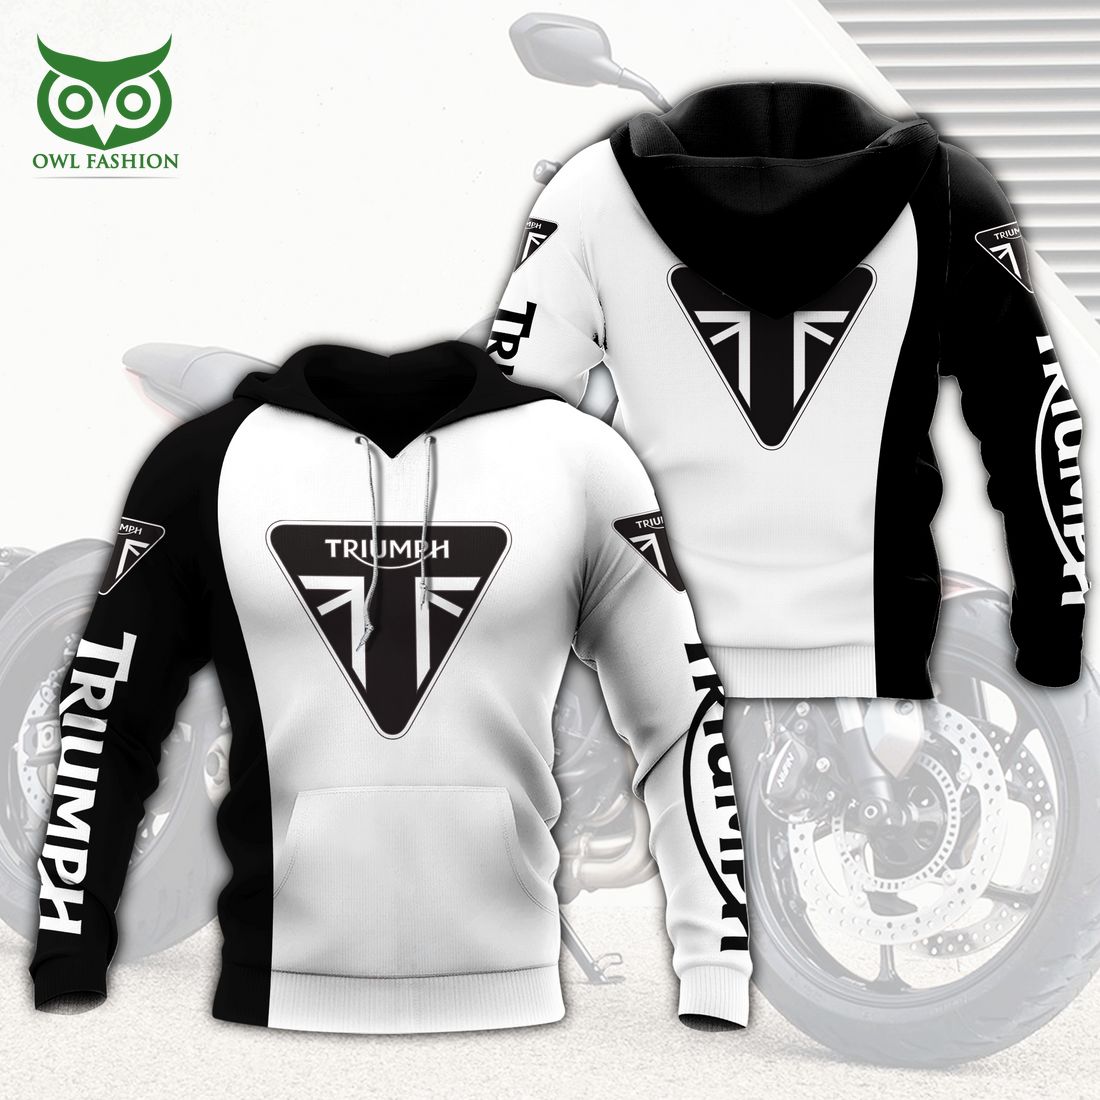 triumph motorcycles white and black 3d shirt 1 aHryv